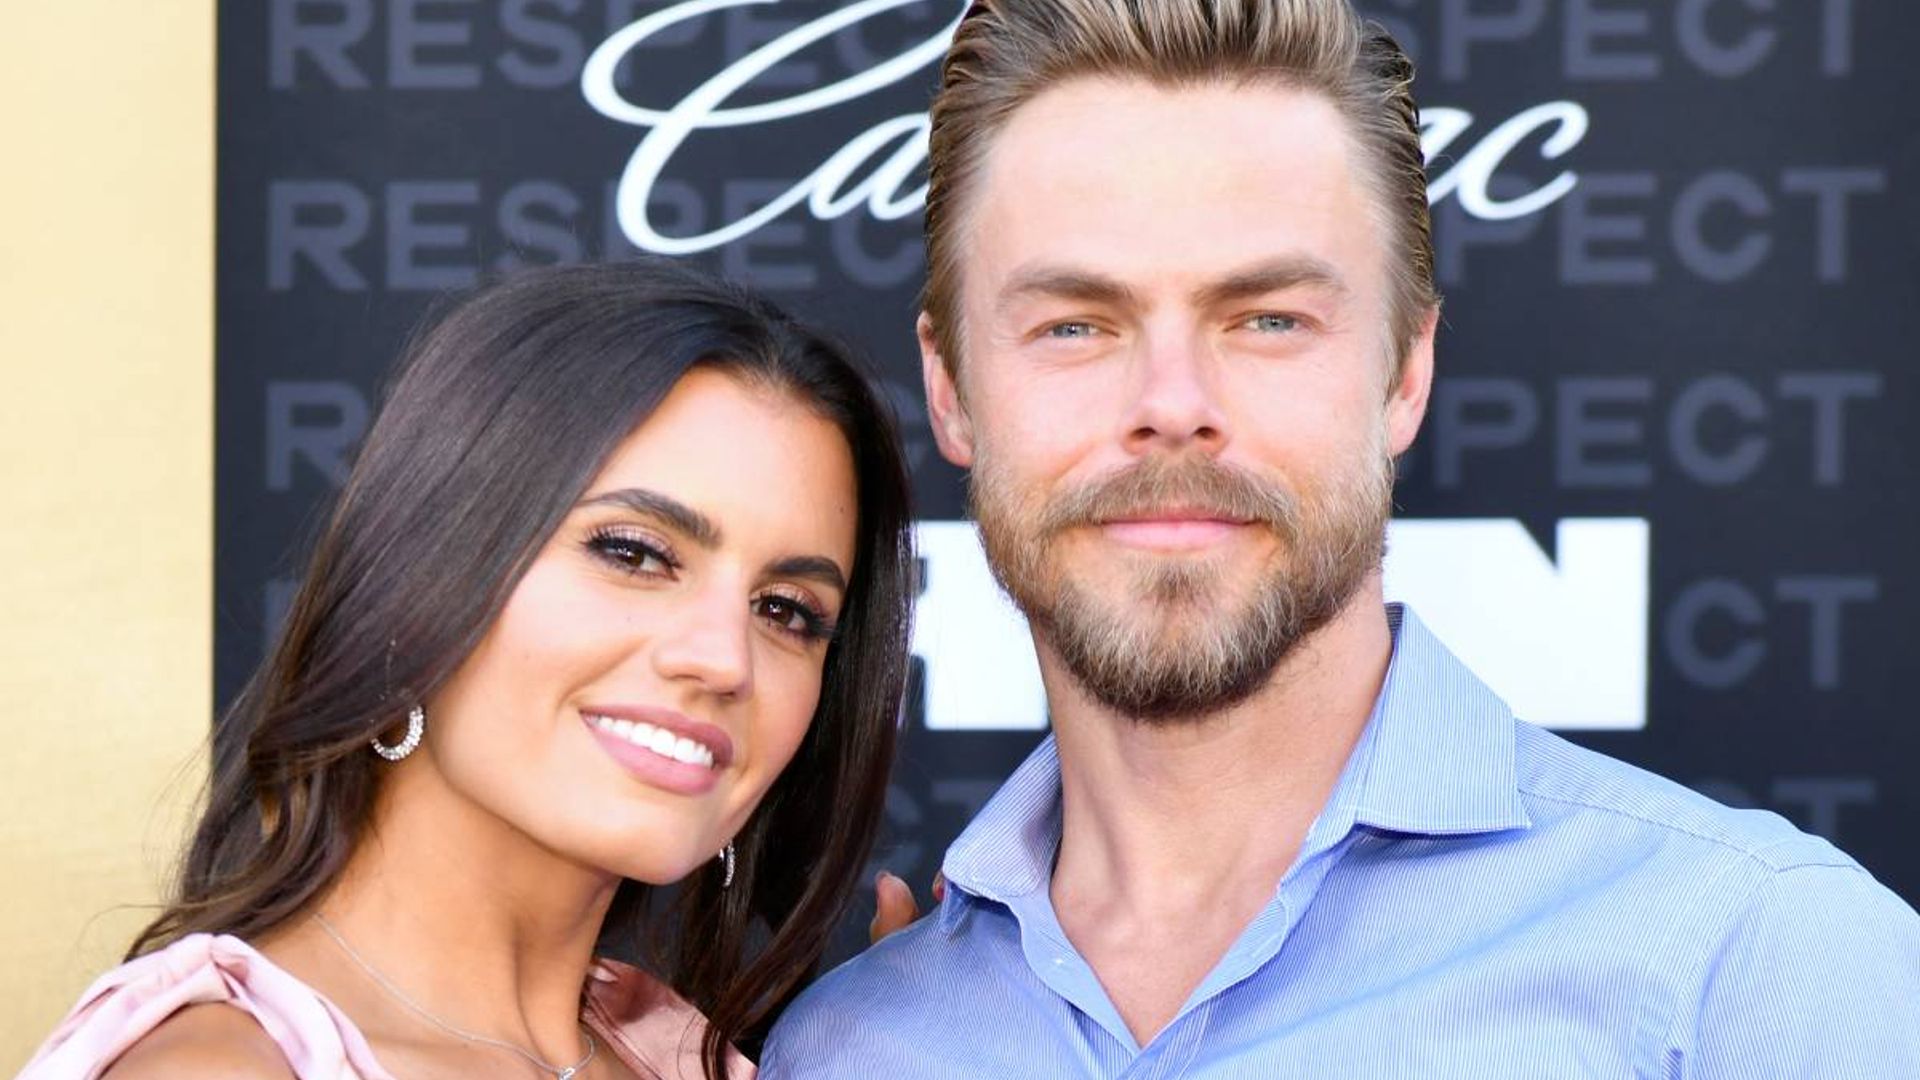 Derek Hough and Hayley Erbert delight fans with exciting countdown